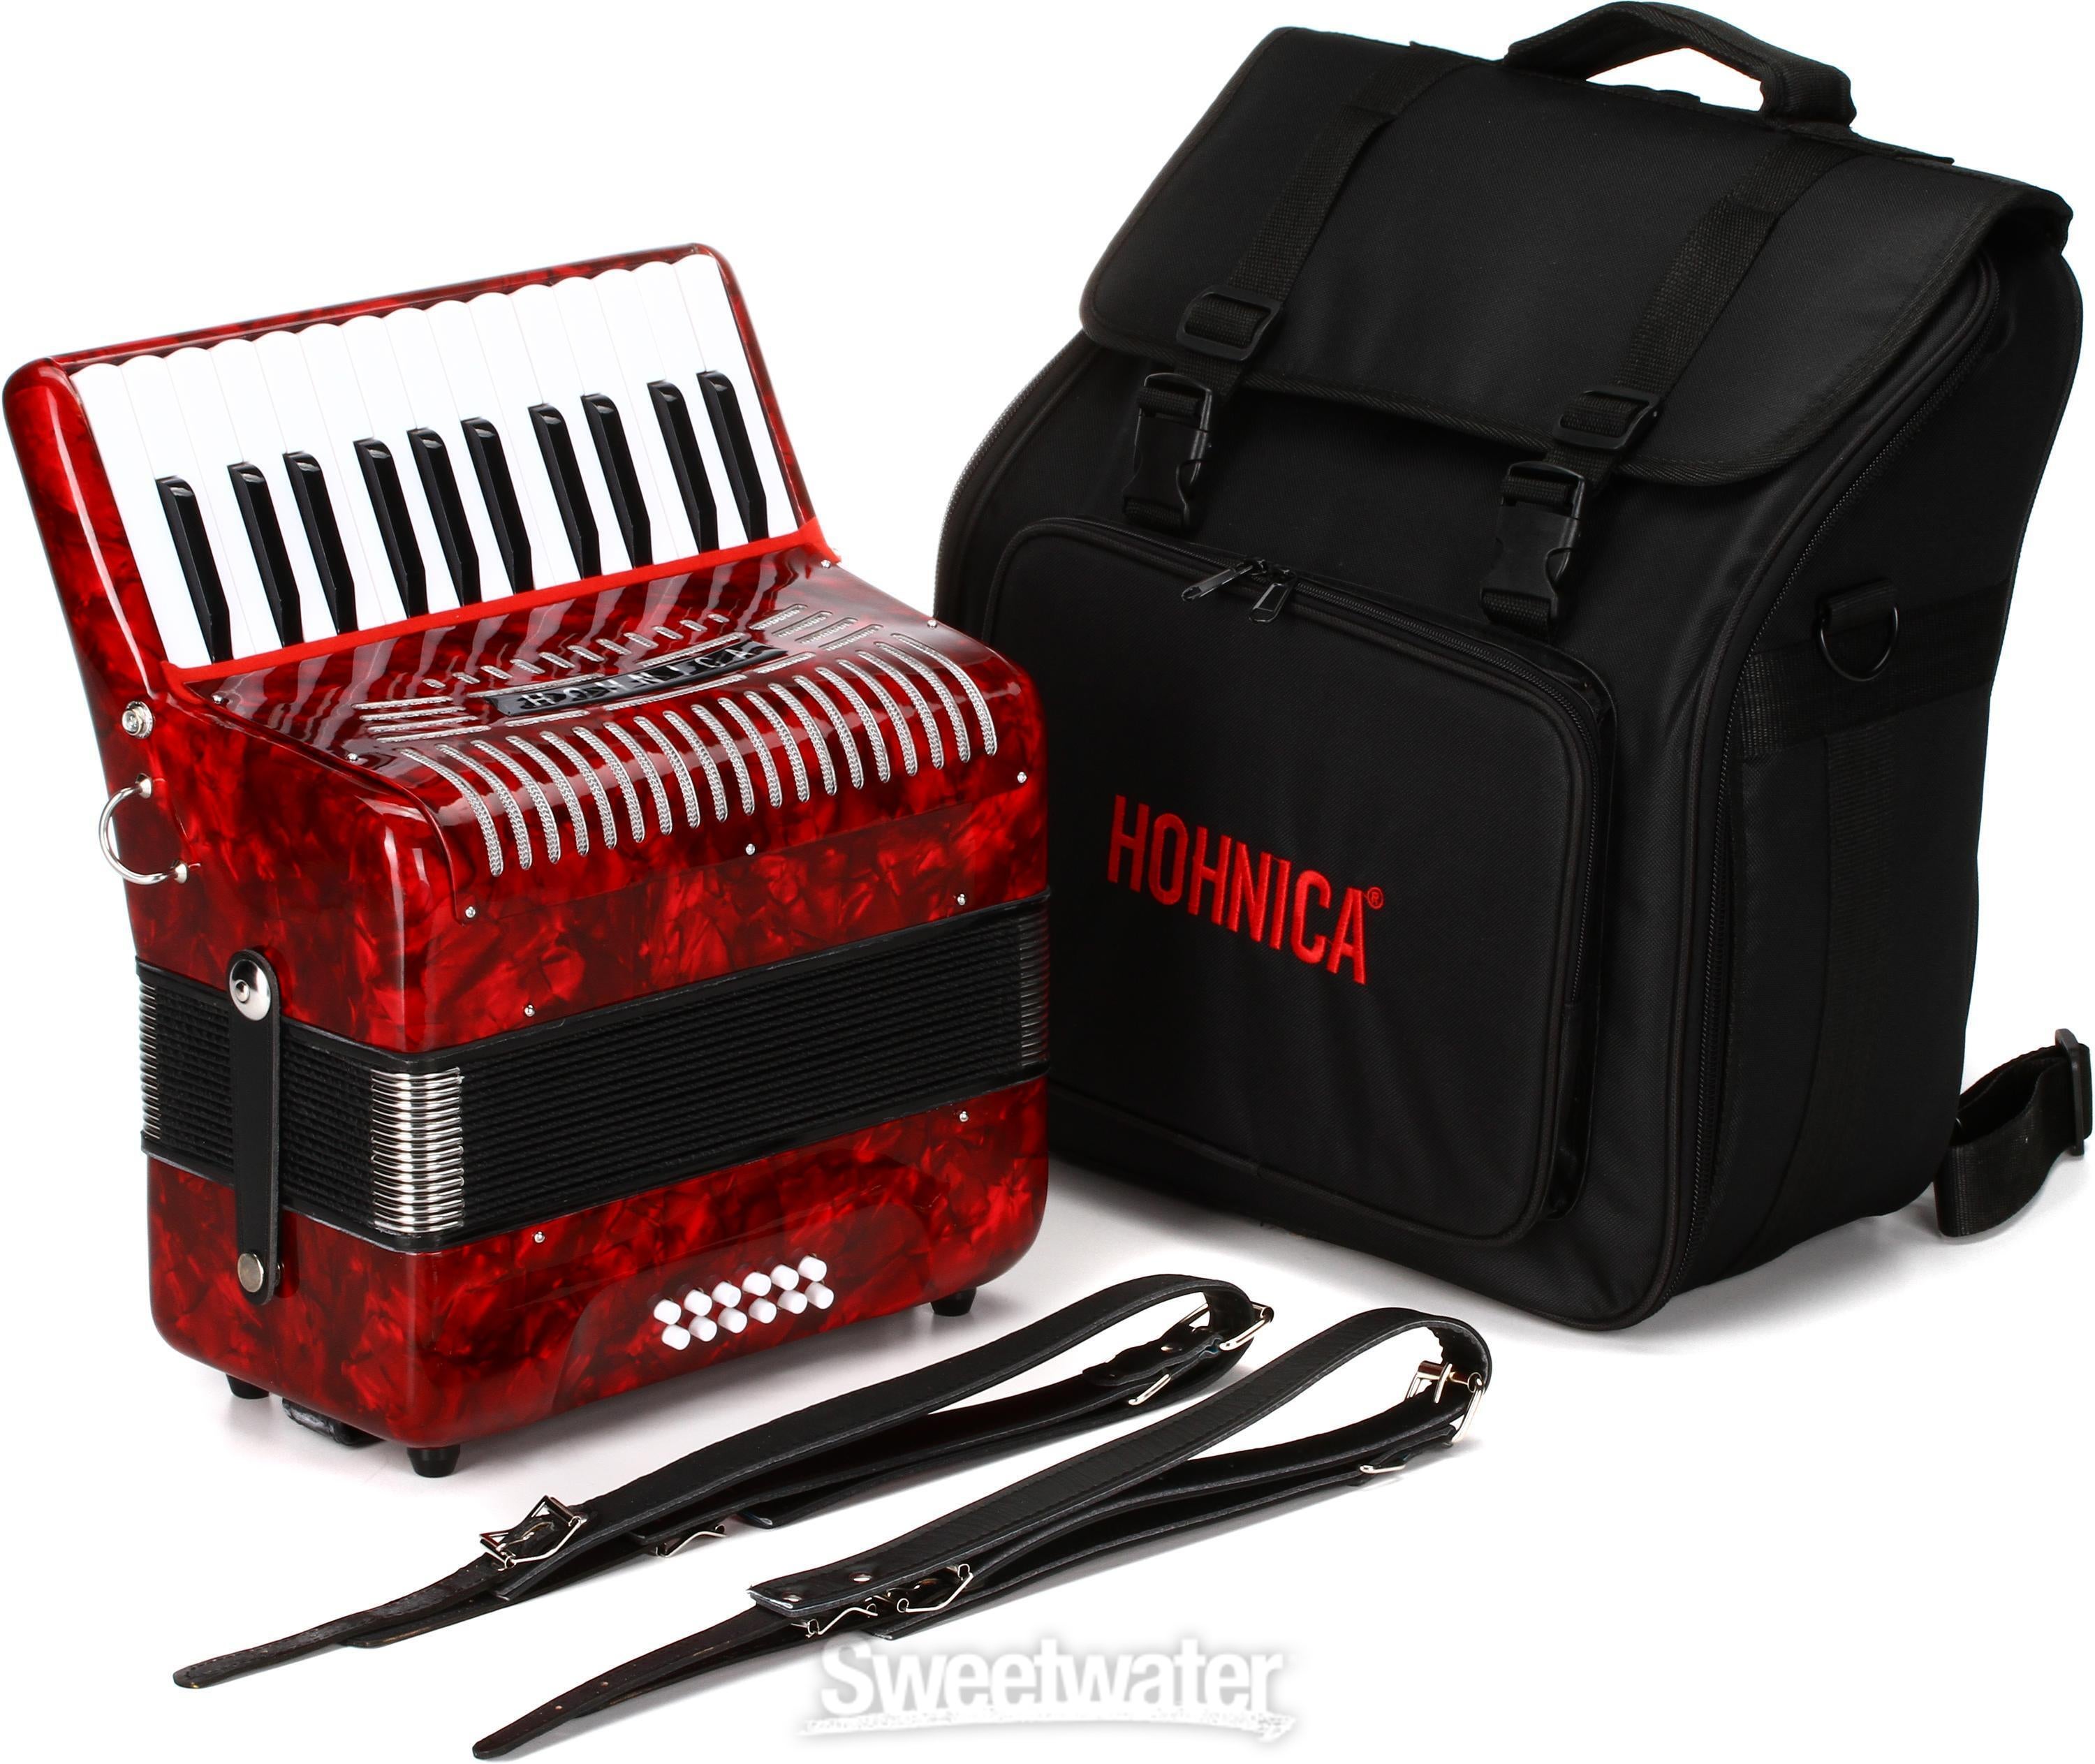 Hohner Hohnica 1303 12 Bass Piano Accordion - Pearl Red | Sweetwater